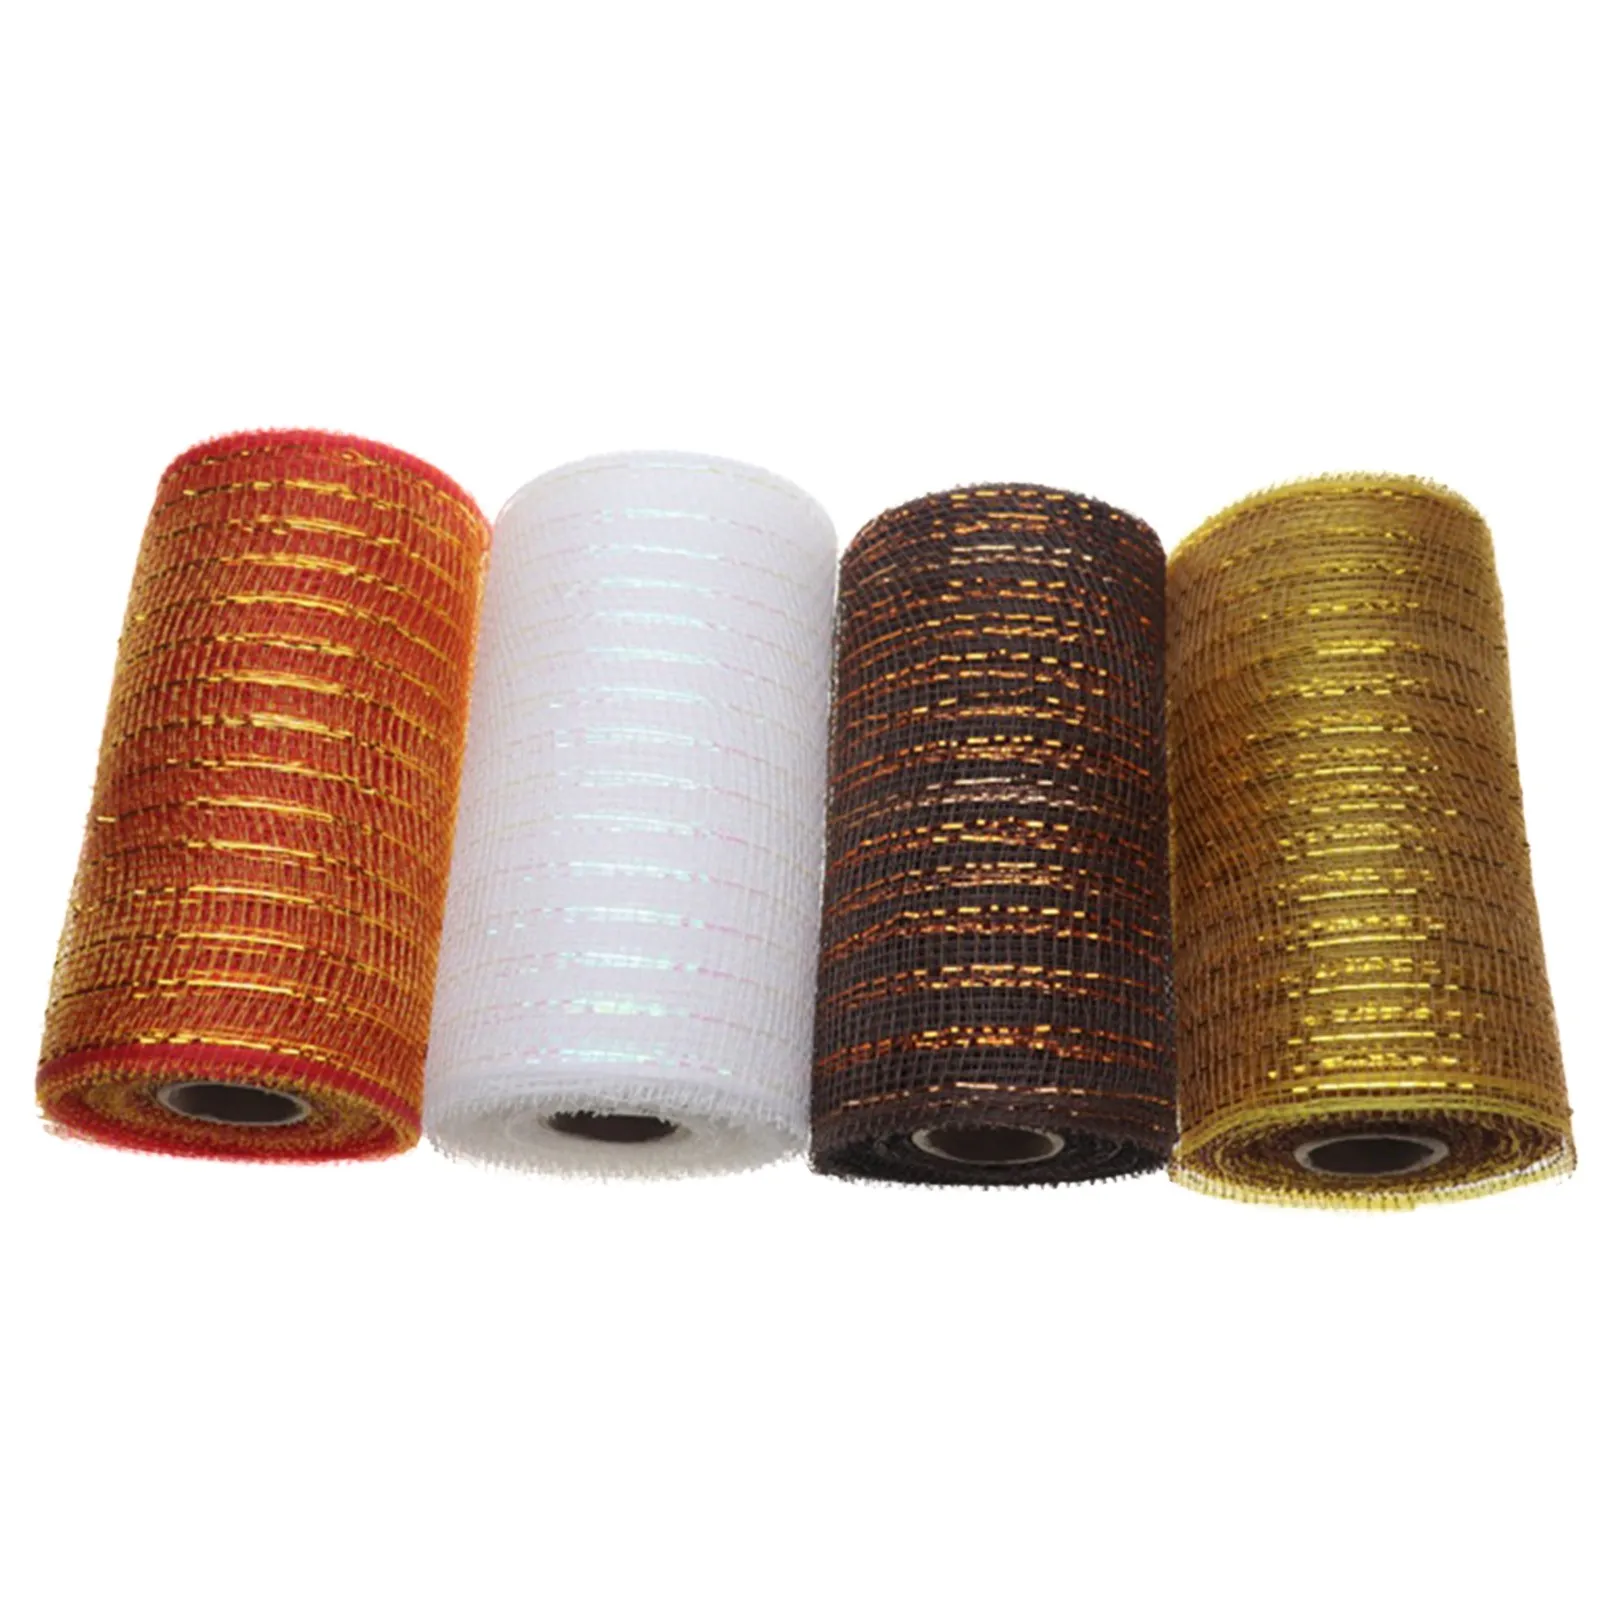 Deco Poly Metallic Mesh Ribbon, 10 inch x 30 Feet - Chocolate Brown with Copper Foil